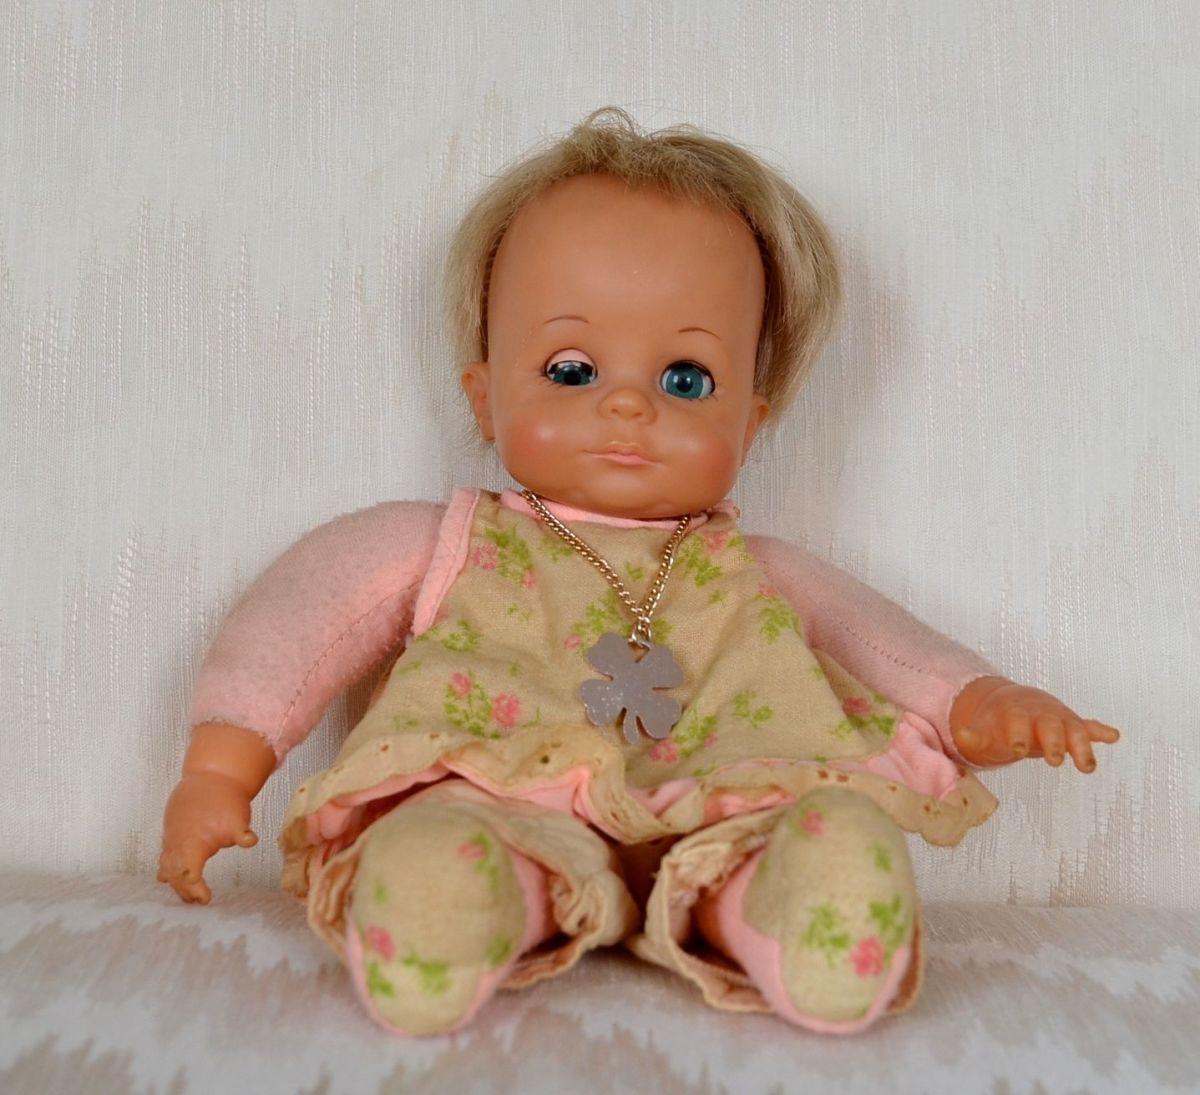 baby dolls from the 1960s